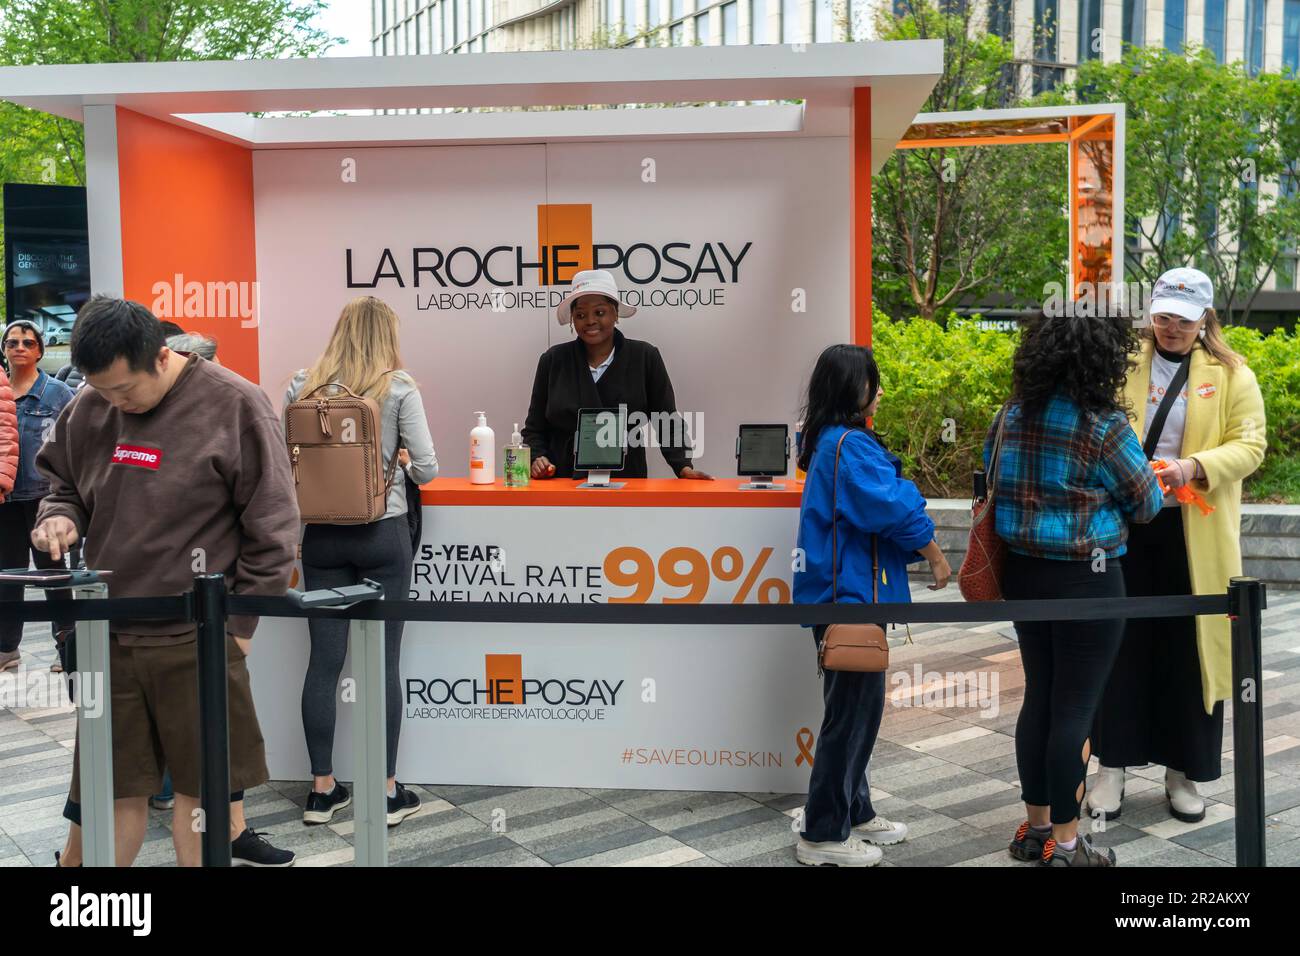 Visitors to Hudson Yards receive sunscreen samples after having their moles checked for skin cancer at a brand activation in Hudson Yards in New York for La Roche-Posay Laboratoire Dermatologique on Monday, May 1, 2023. La Roche-Posay is a brand of LÕOreal. (© Richard B. Levine) Stock Photo